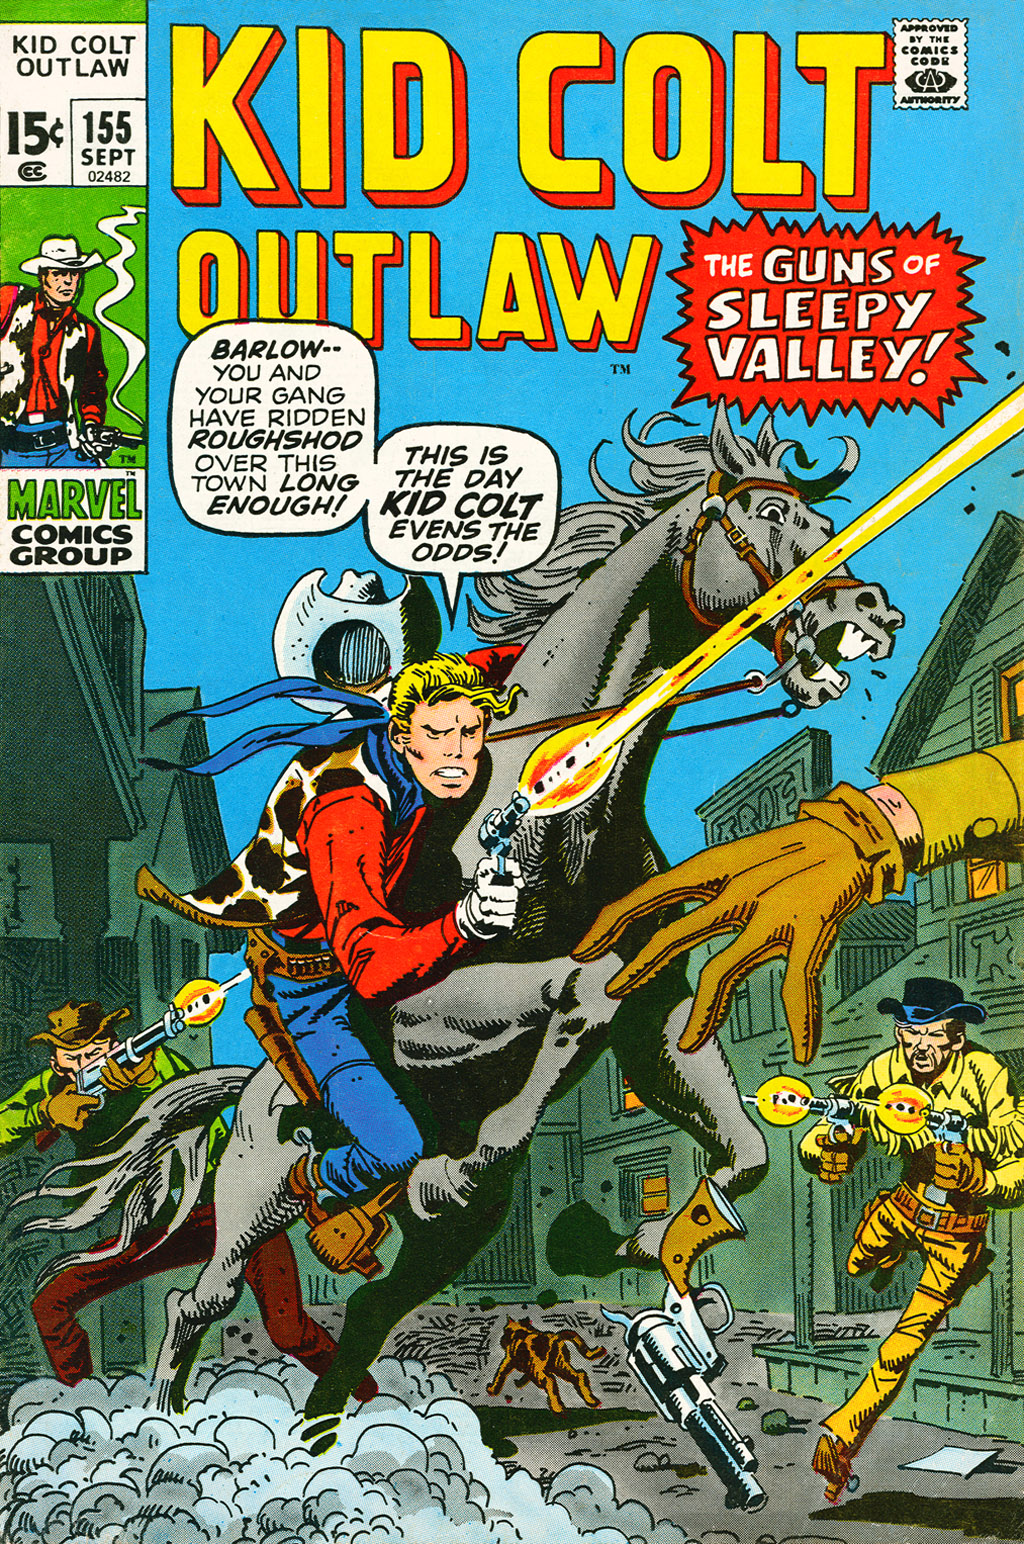 Read online Kid Colt Outlaw comic -  Issue #155 - 1